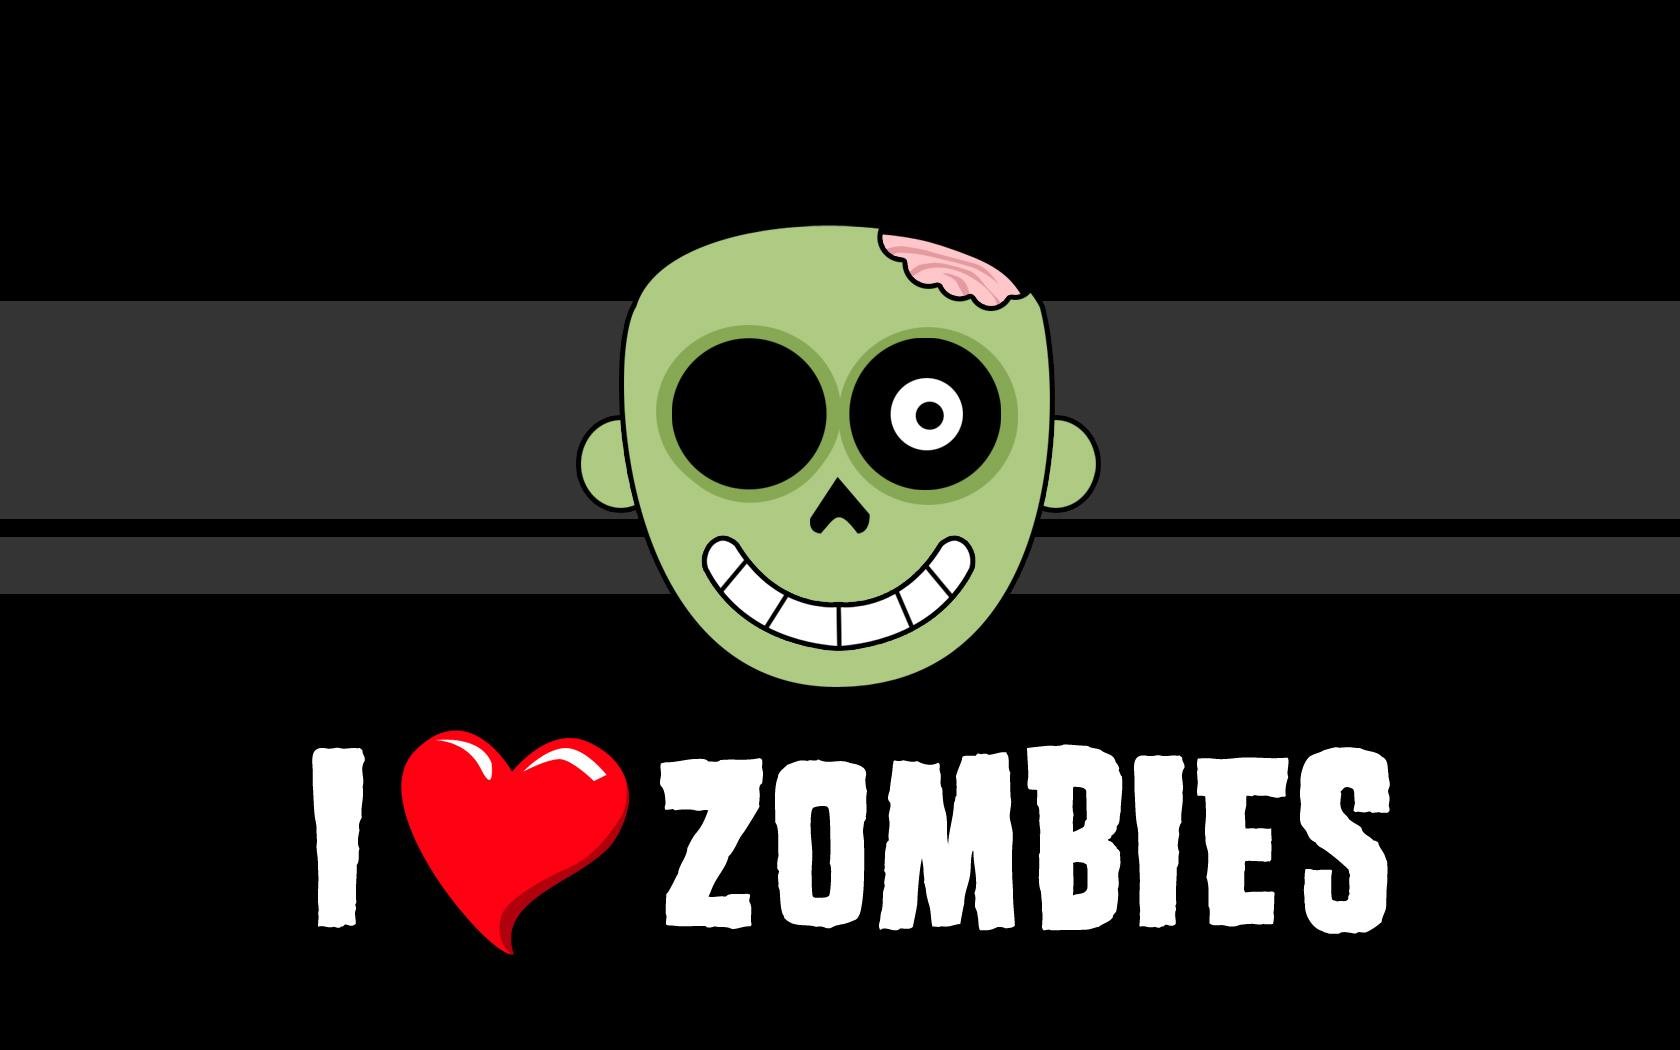 General 1680x1050 zombies typography humor undead heart (design) simple background black background smiling brain